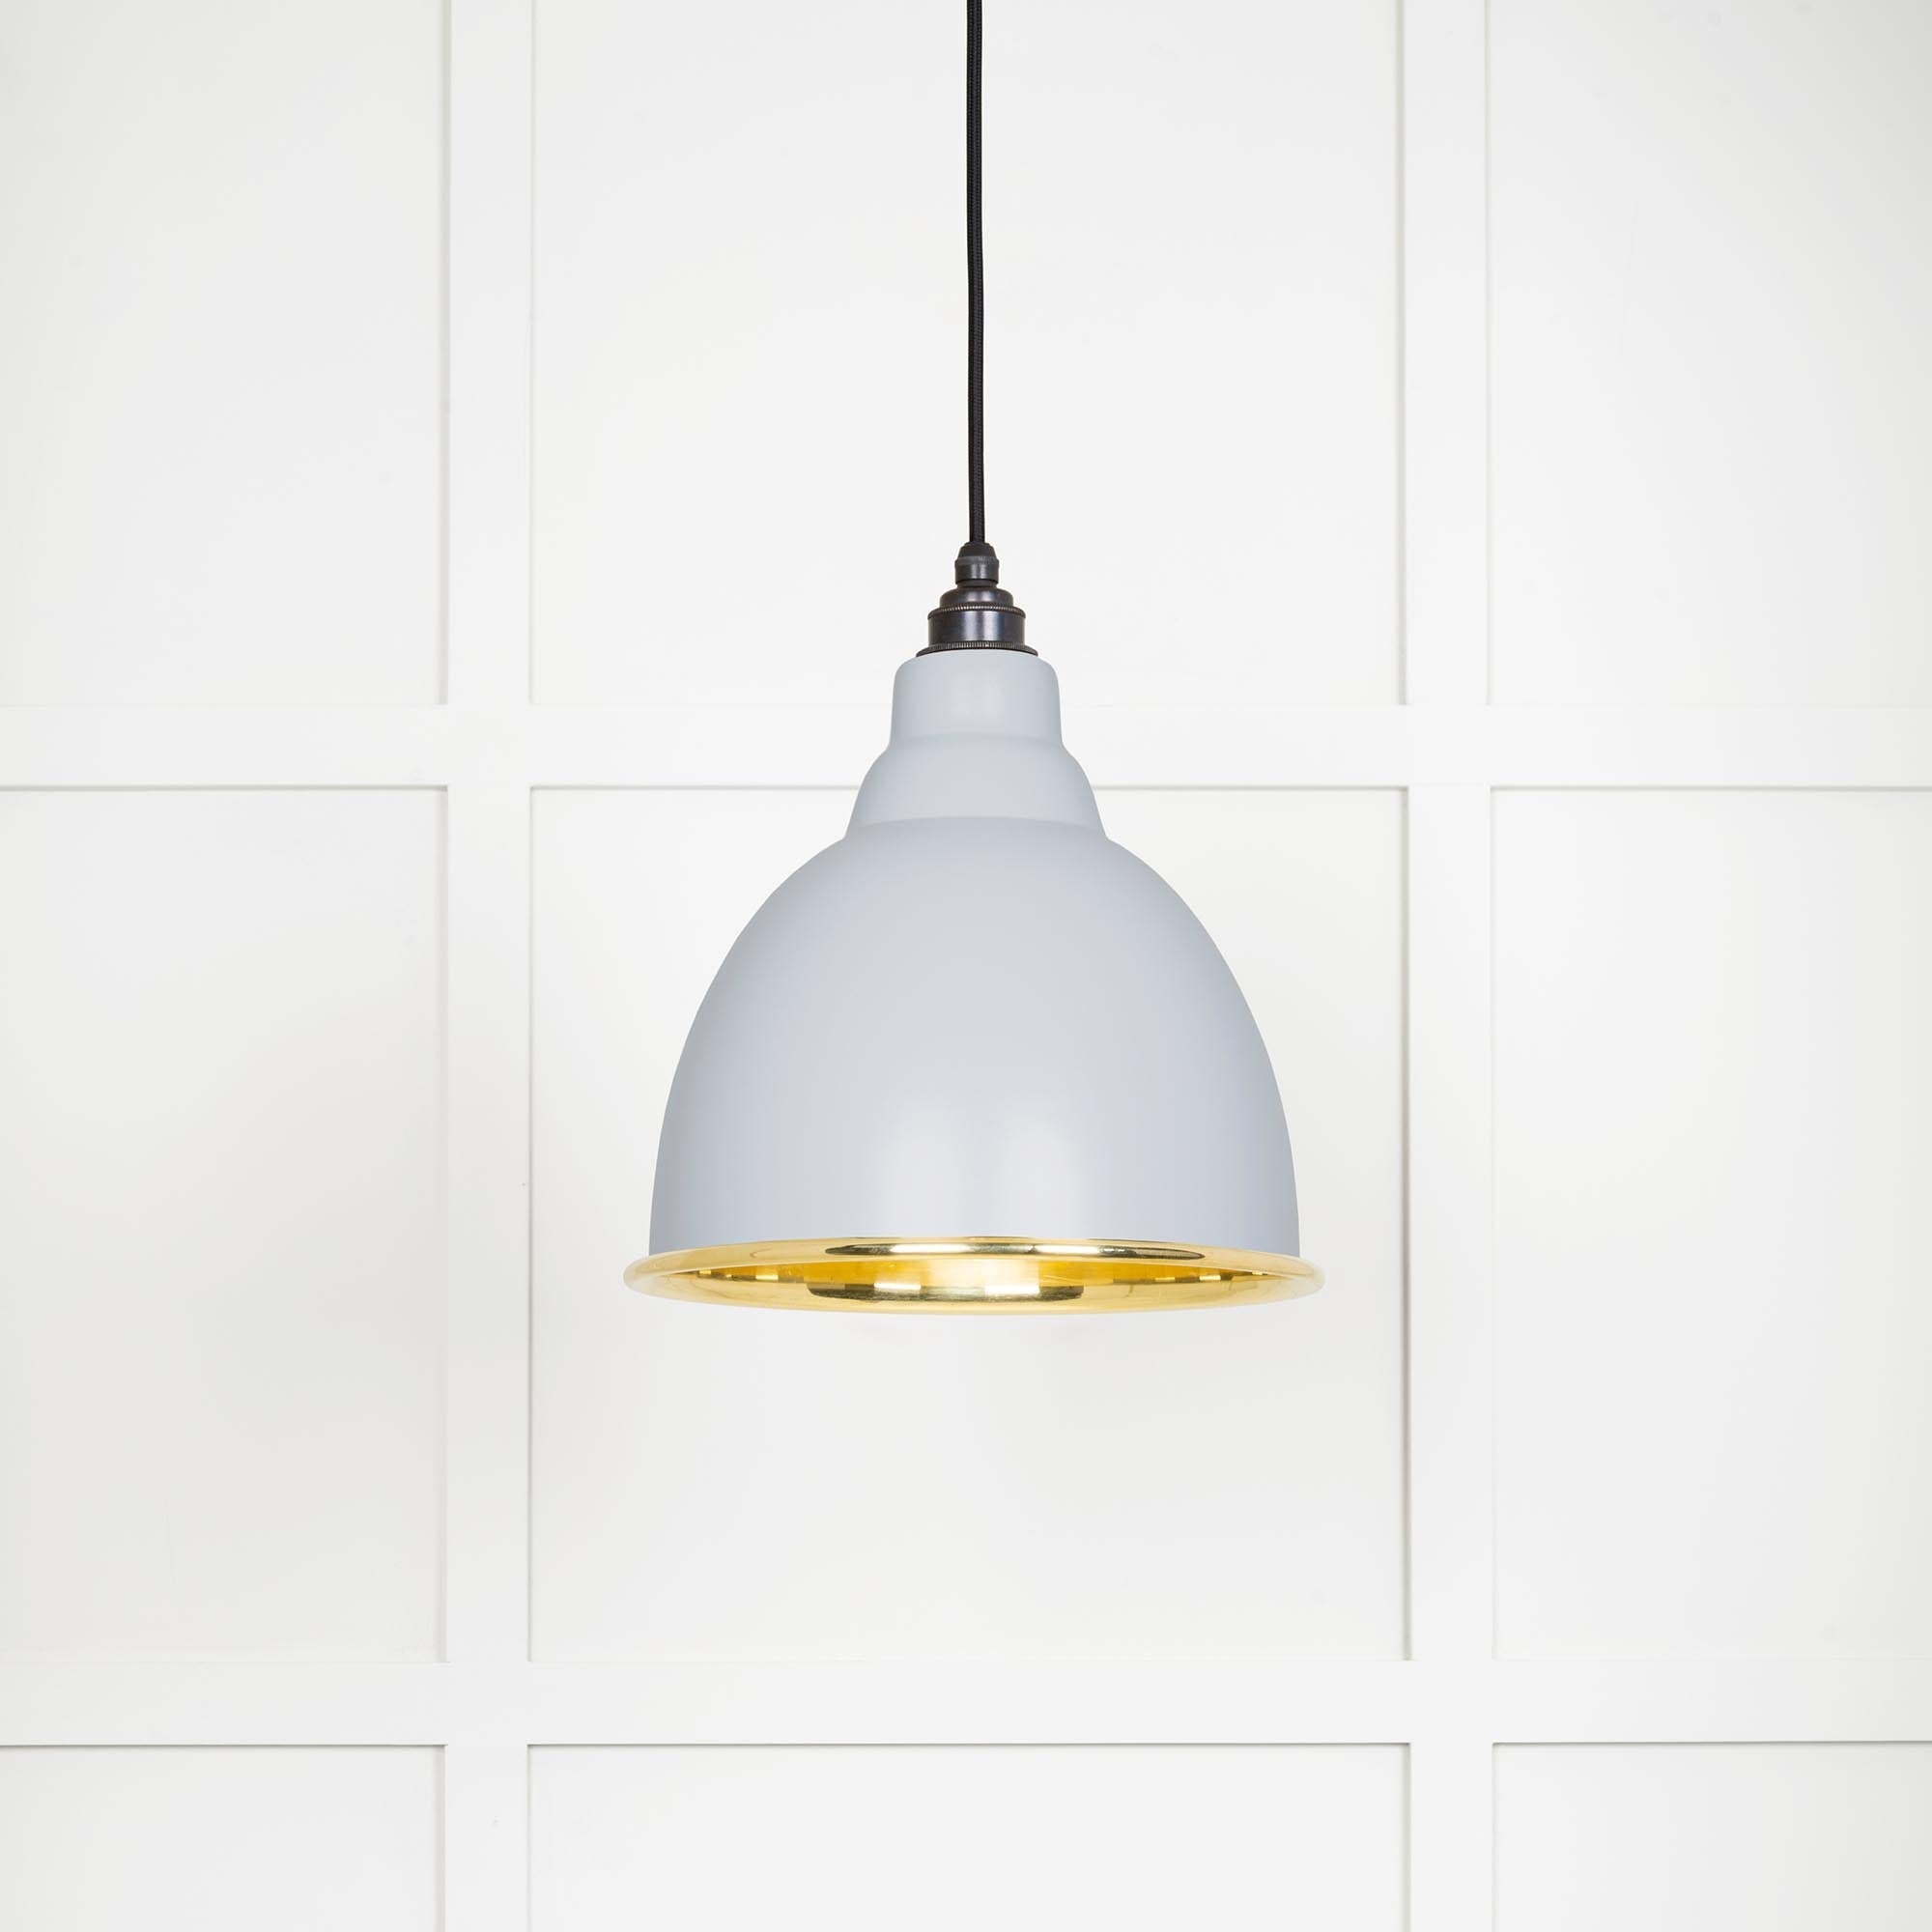 Image of Brindley Ceiling Light in Birch